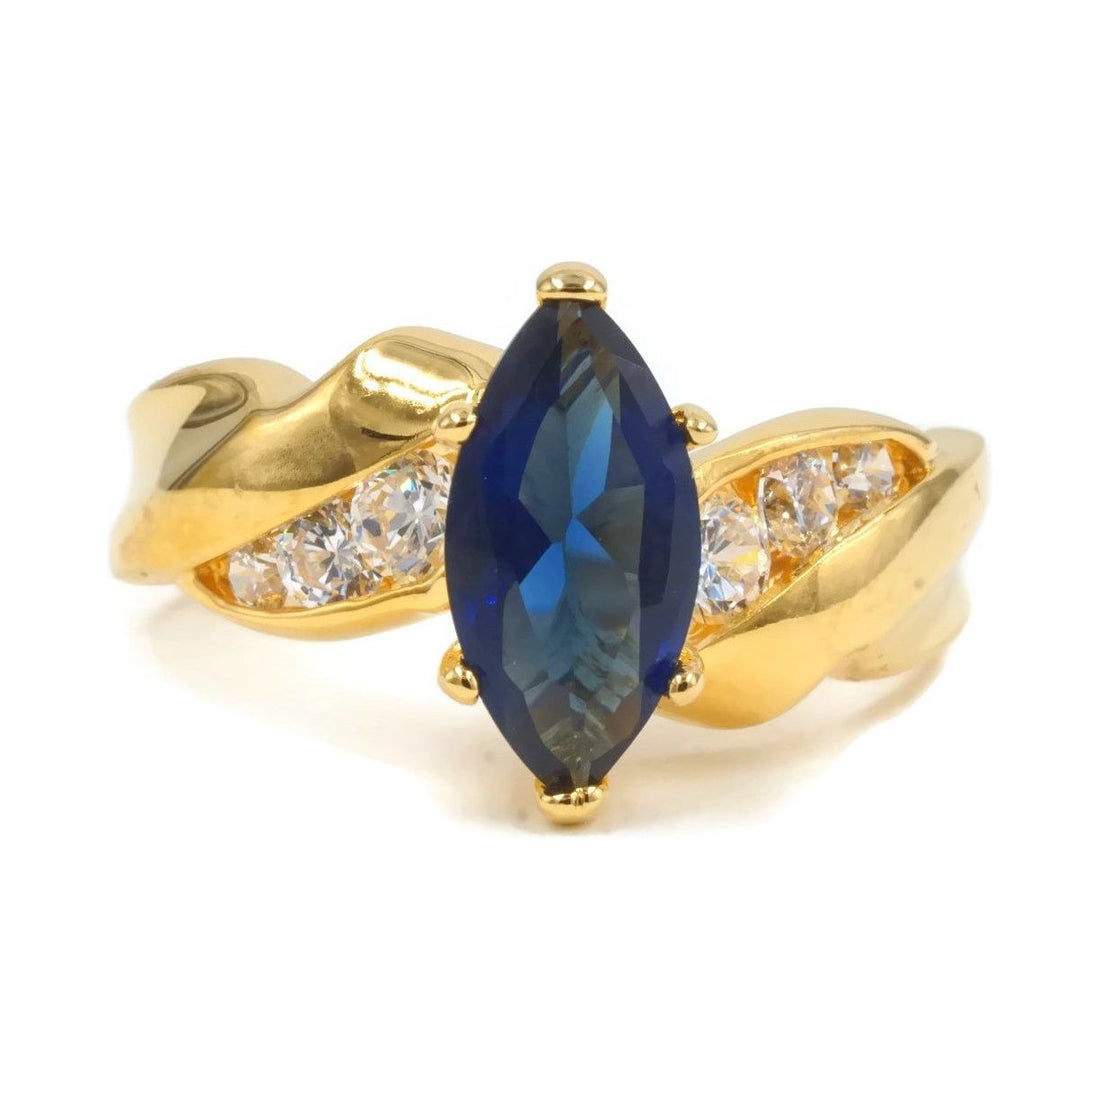 Large Marquise Sapphire Blue Stone Twist Statement Ring